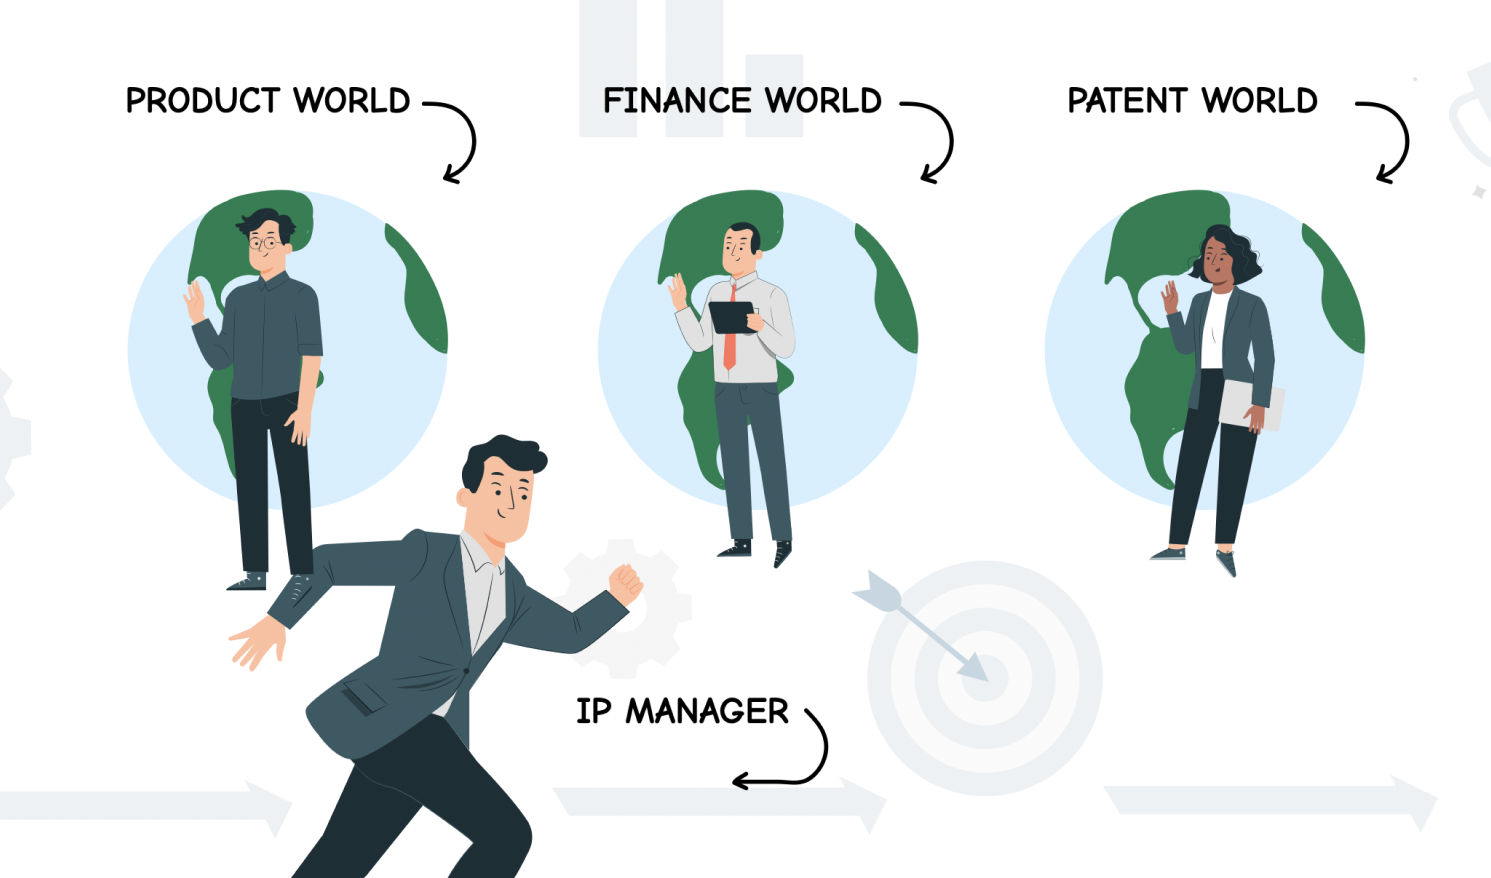 The role of the IP Manager is to bridge the communication between the product, patents, and finance word